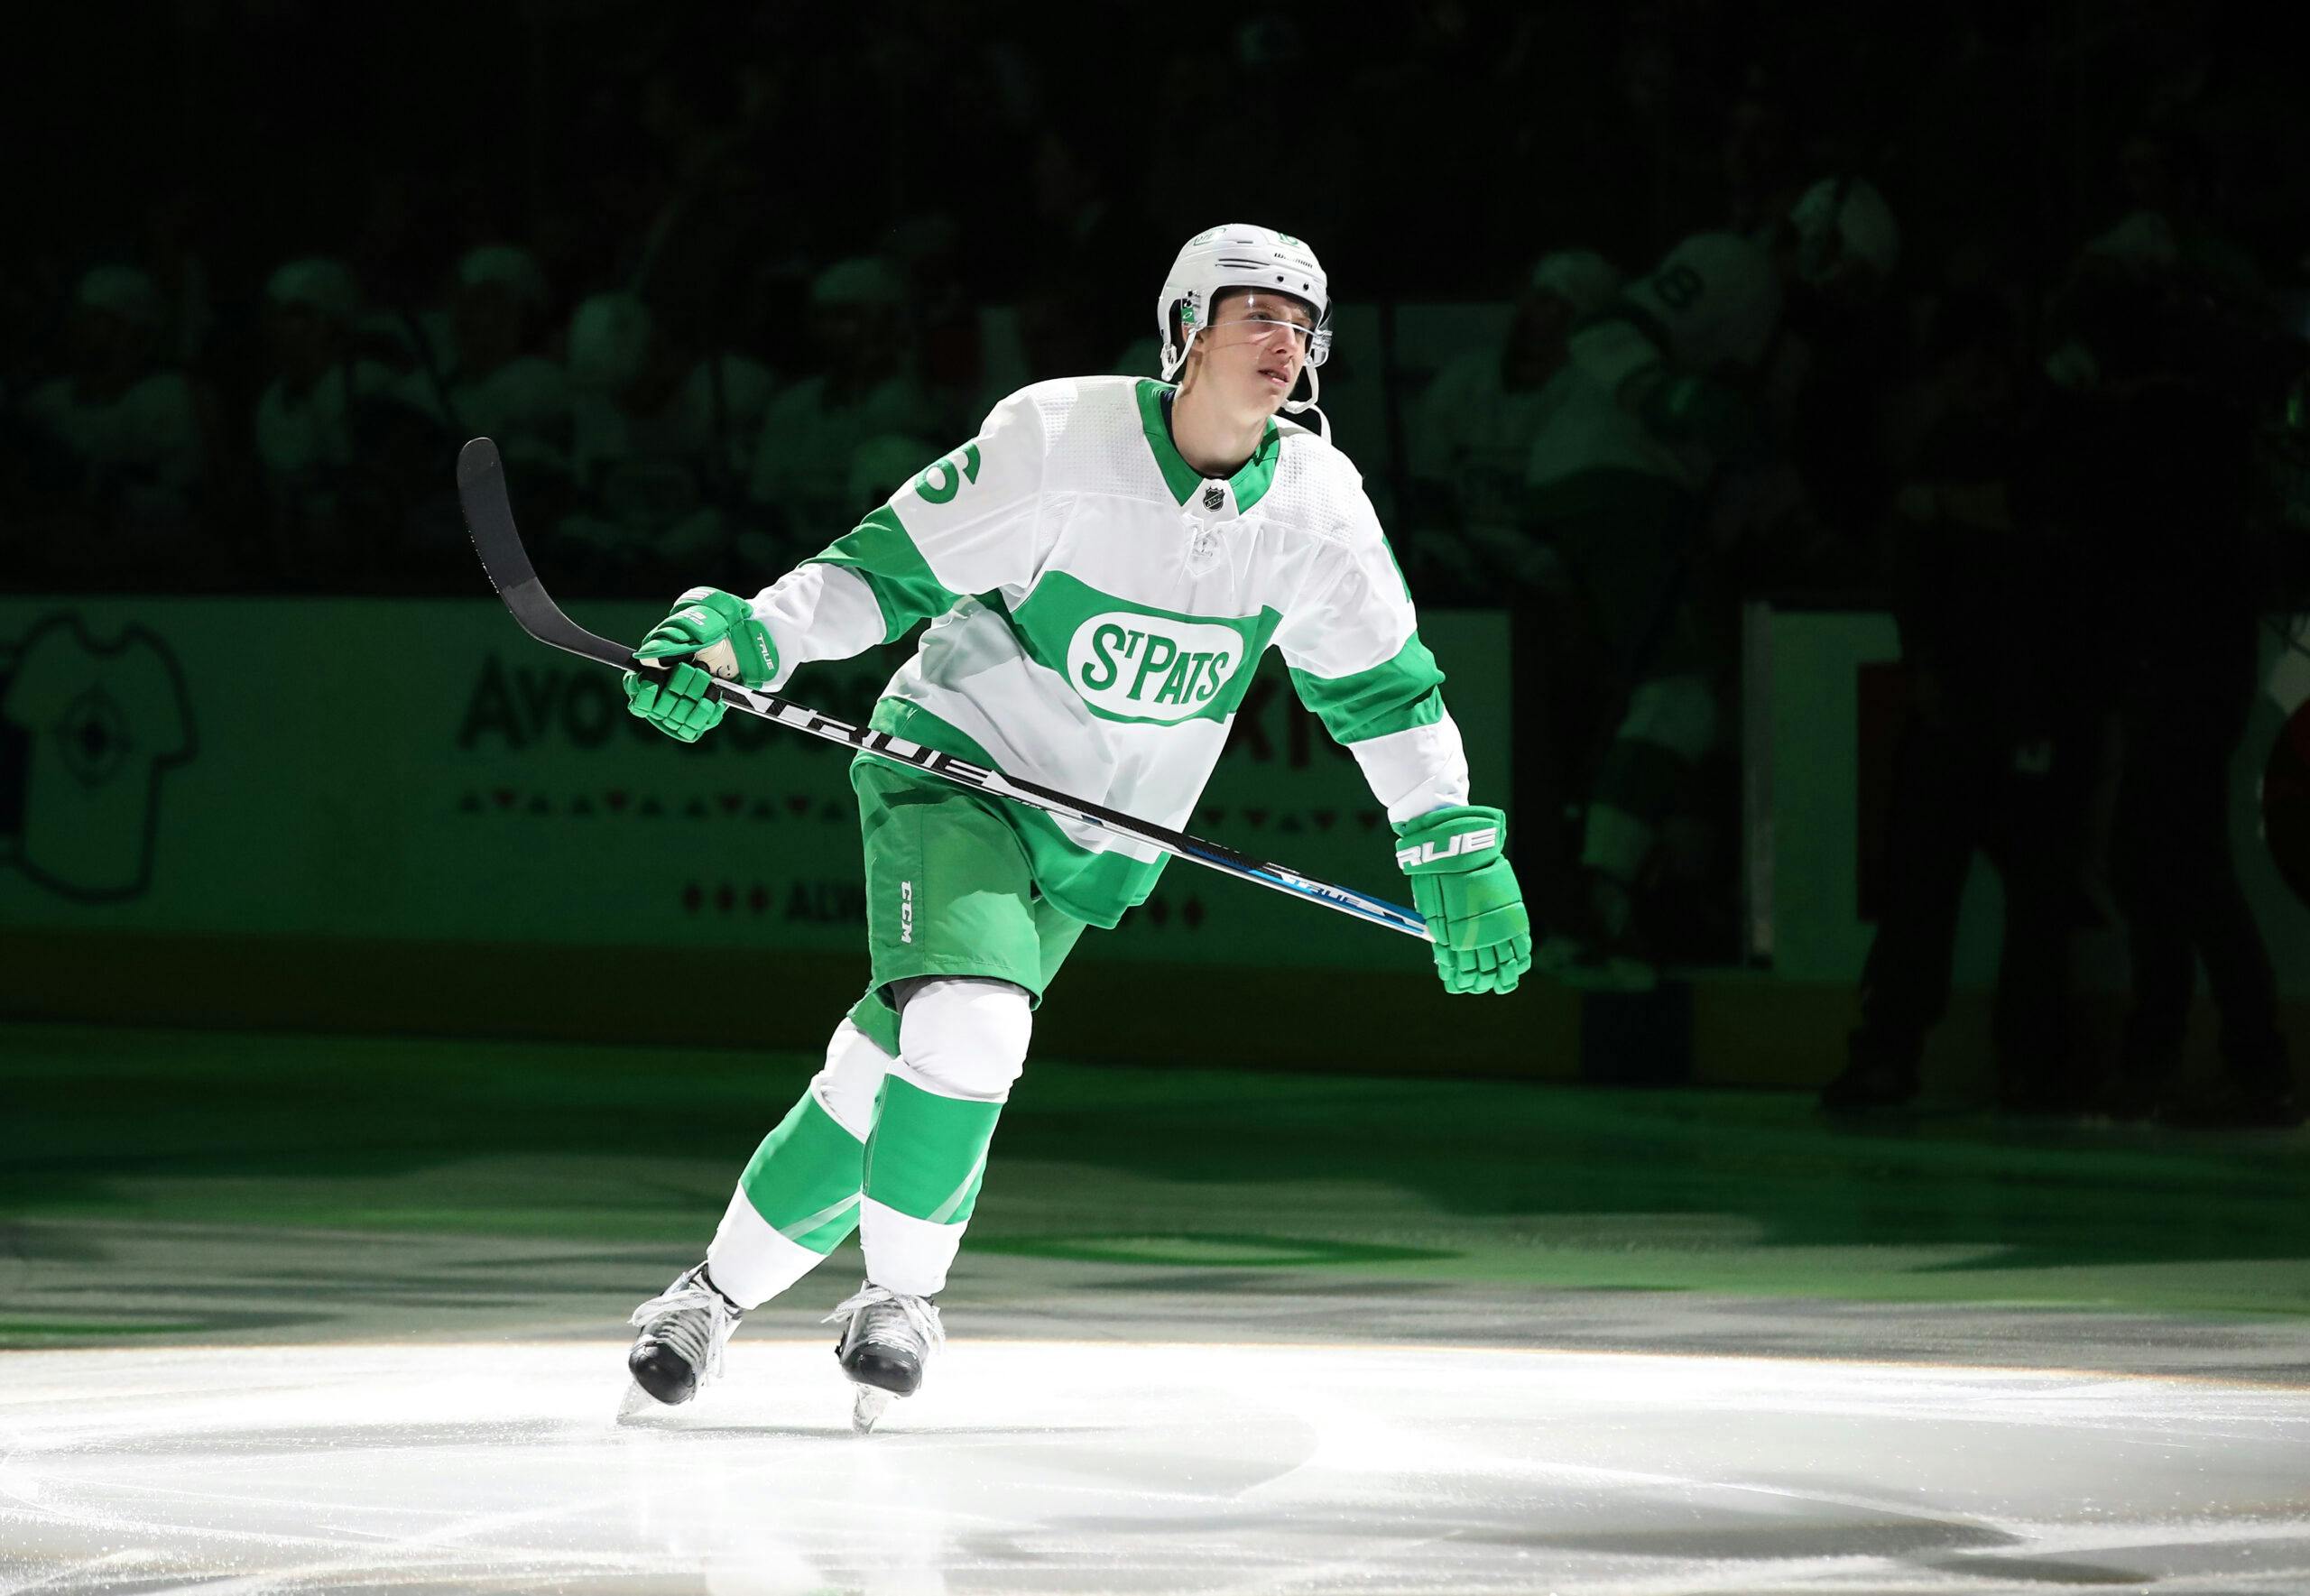 LEAFS TO WEAR ST PATS UNIFORMS MARCH 18 - In Play! magazine